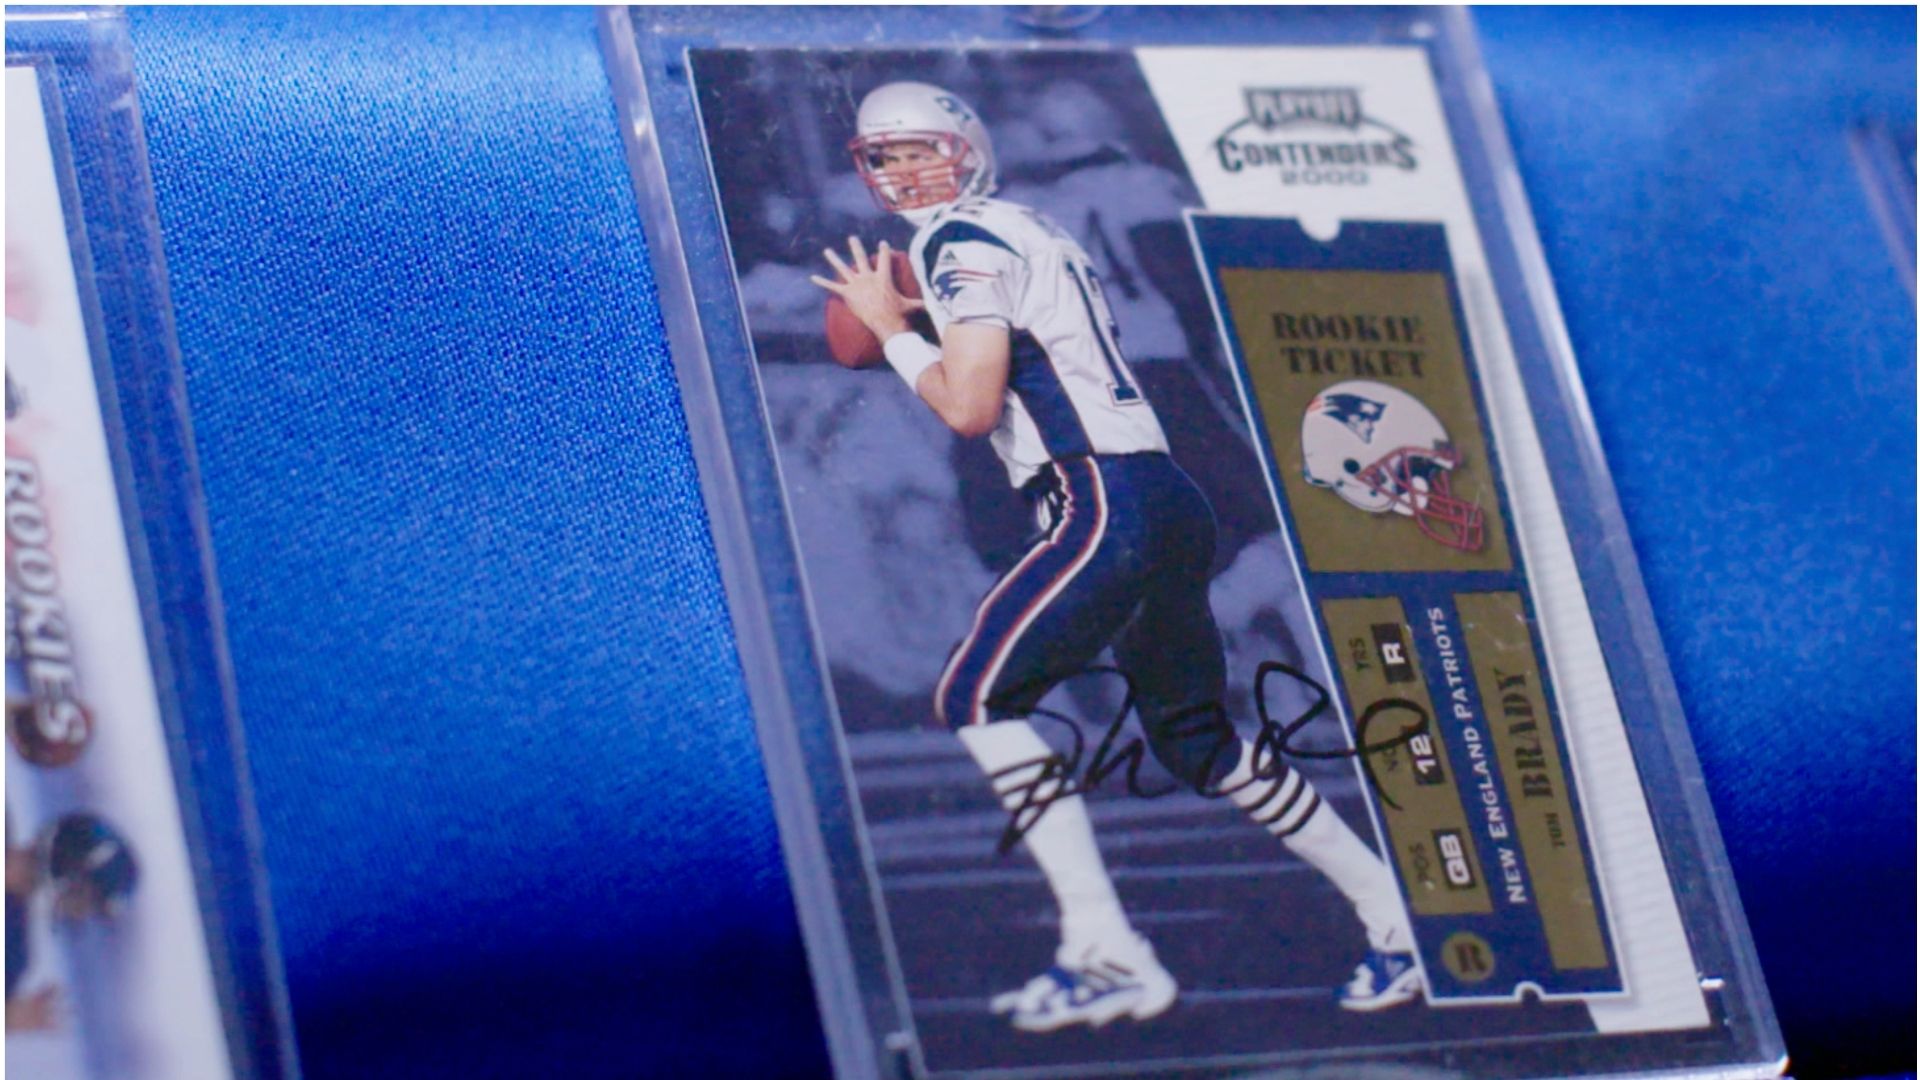 WATCH: Tom Brady trades $1,000 rookie card with young fan – NBC